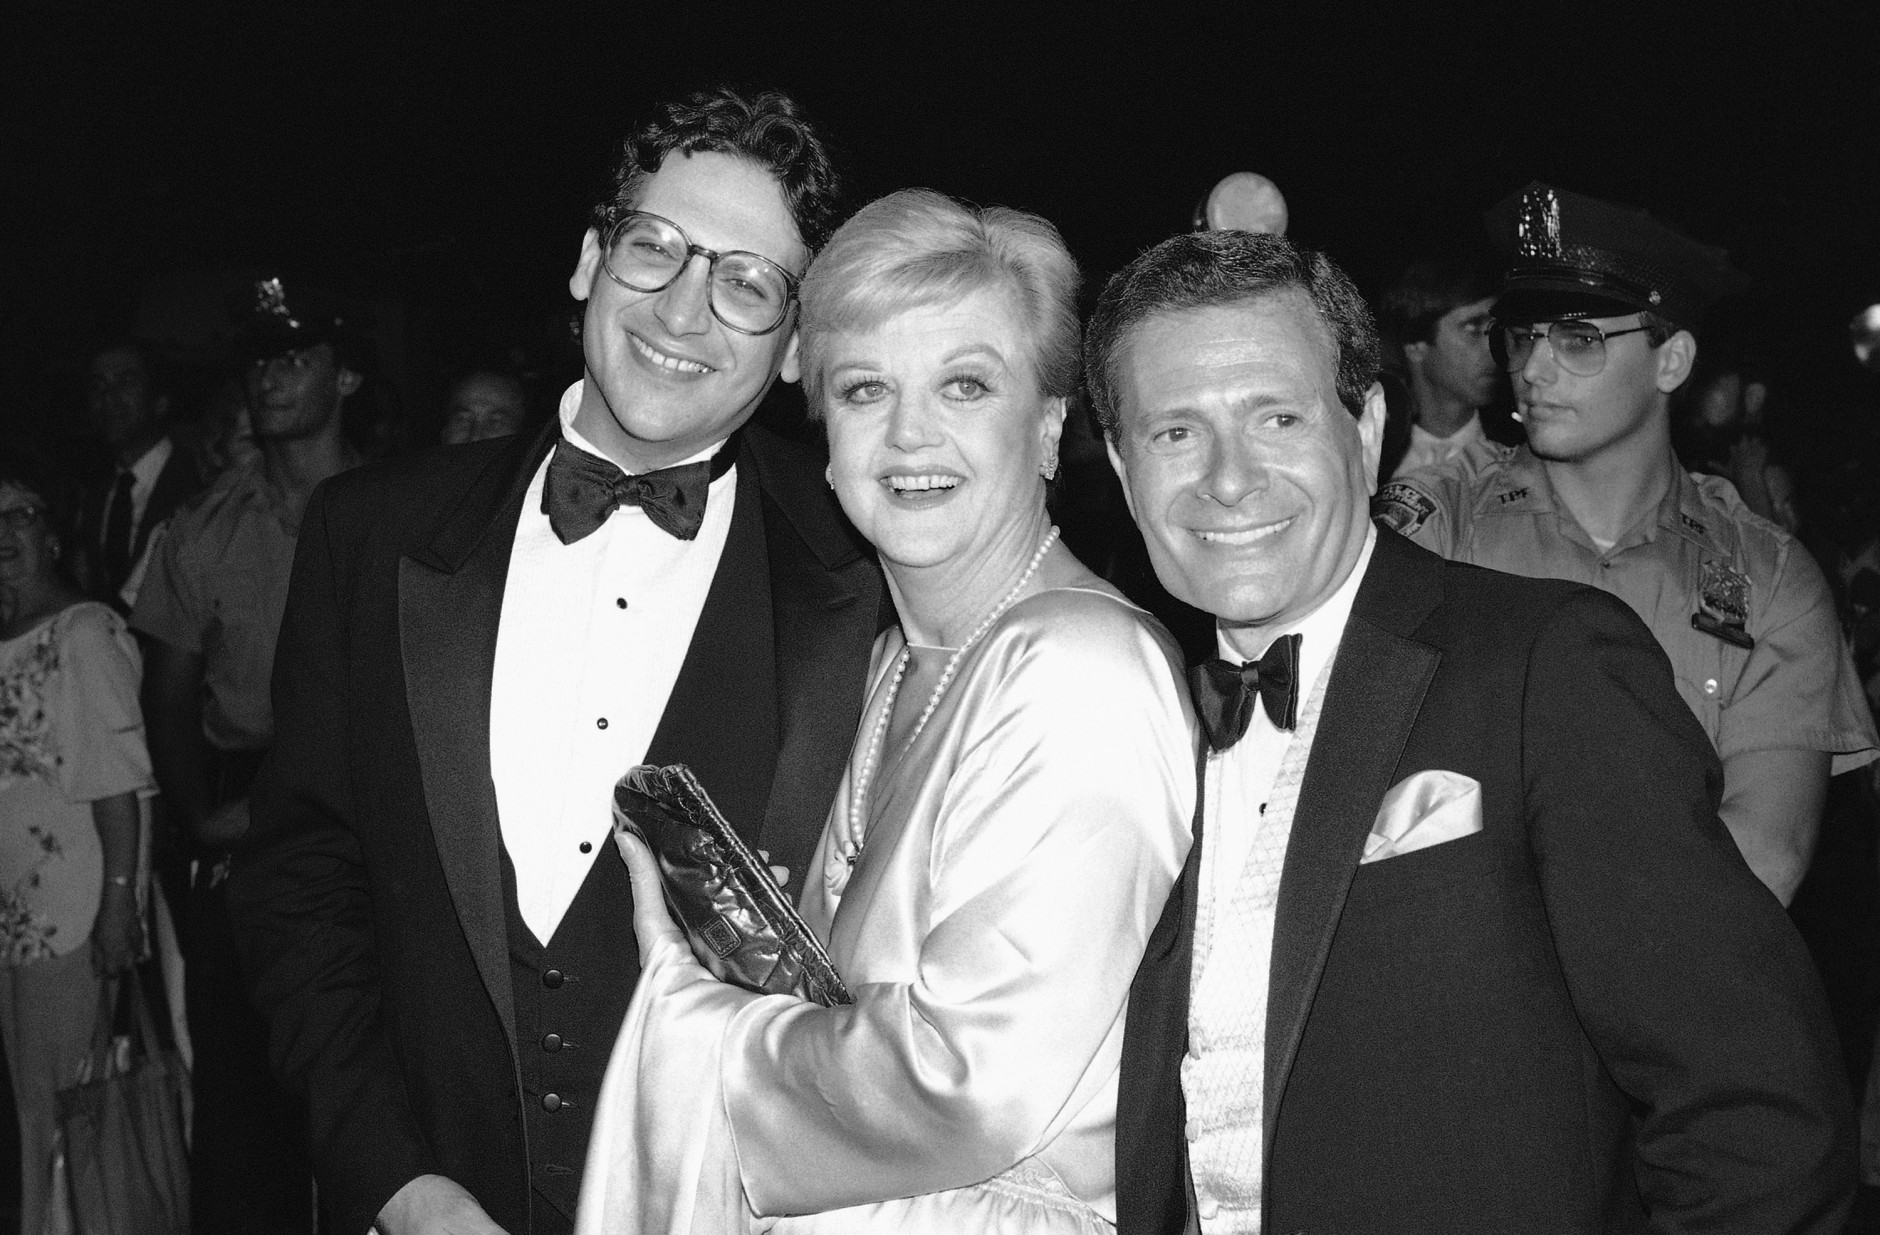 Actress Angela Lansbury, center, poses with actor-author Harvey Fierstein, left, and composer-Lyricist Jerry Herman, Sunday, August 21, 1983 in New York at the Broadway opening party for the play La Cage Aux Folles." Fierstein wrote the book La Cage Aux Folles, and Herman authored the music and Lyrics for the Broadway musical Mame. (AP Photo/Rene Perez)